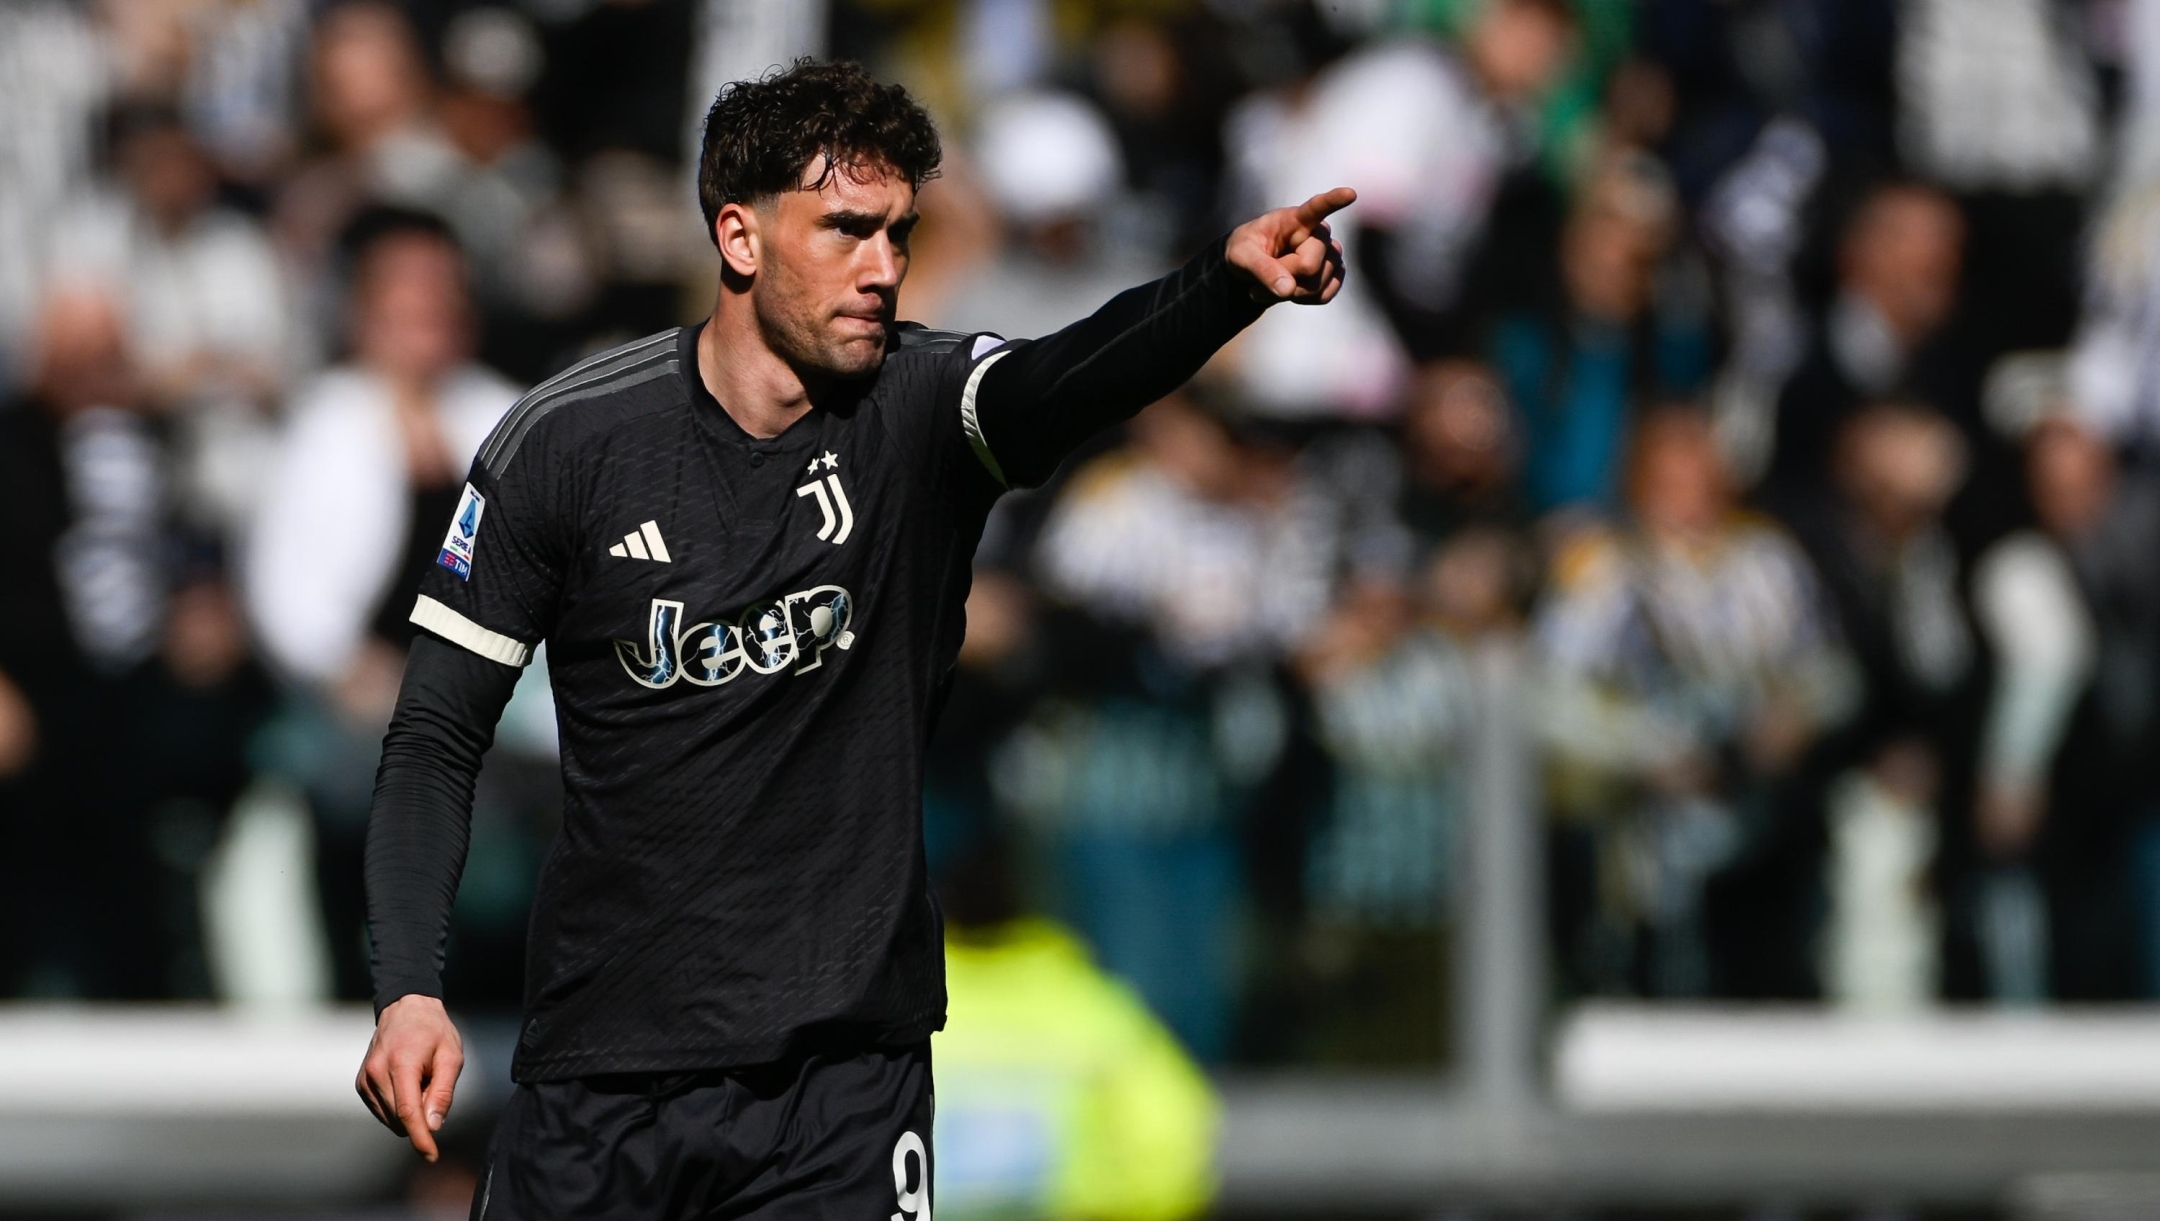 TURIN, ITALY - FEBRUARY 25: Dusan Vlahovic of Juventus celebrates after scoring his team's second goal during the Serie A TIM match between Juventus and Frosinone Calcio at Allianz Stadium on February 25, 2024 in Turin, Italy. (Photo by Daniele Badolato - Juventus FC/Juventus FC via Getty Images)